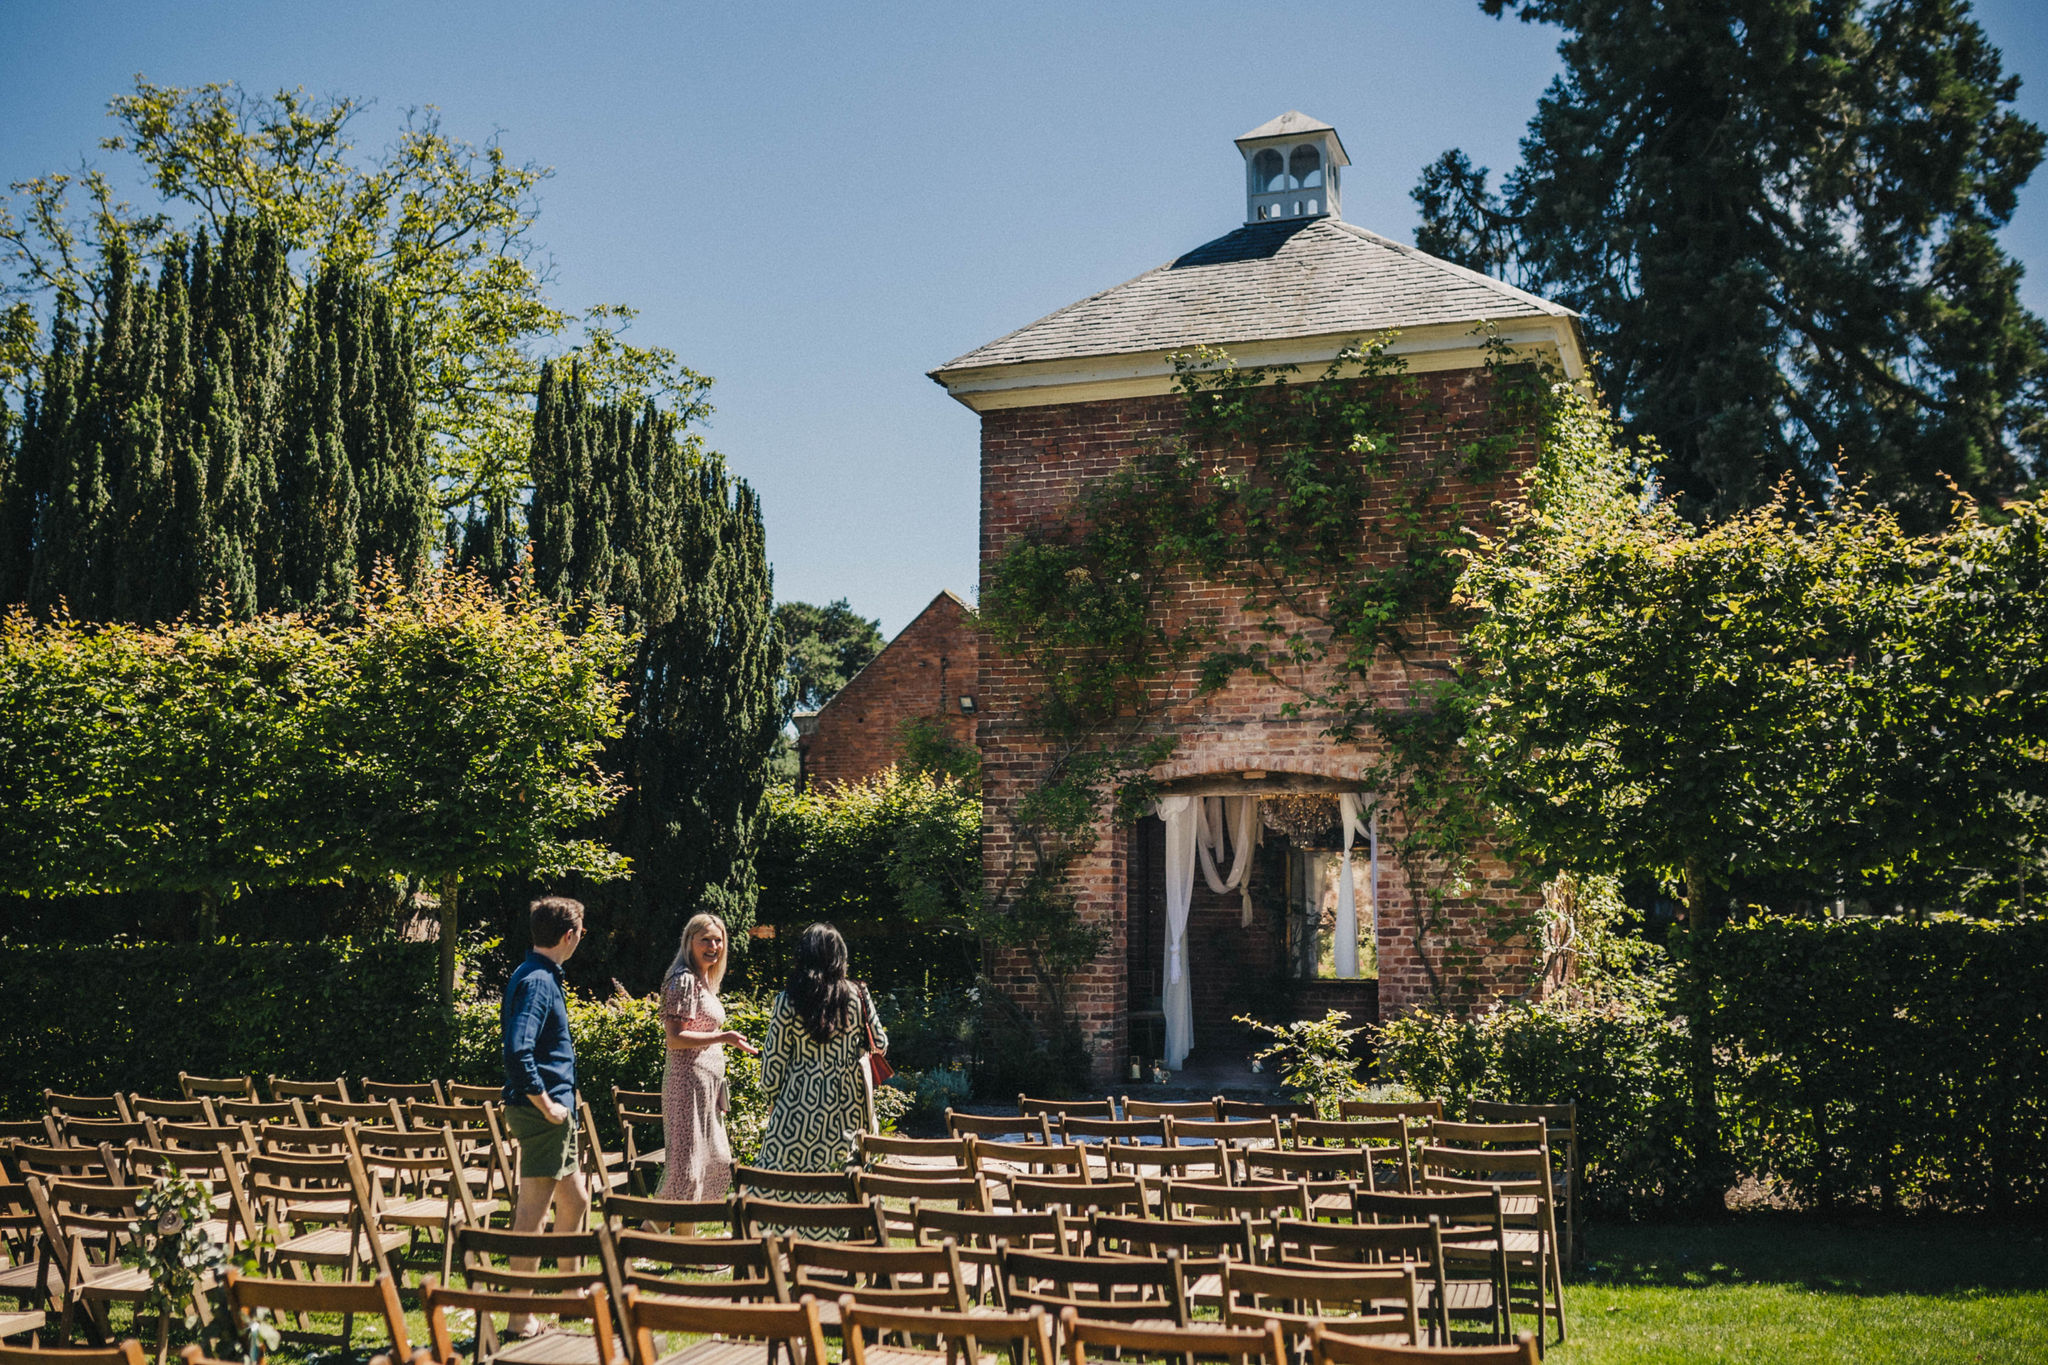 A tall redbrick square outhouse with a slate roof and climbing roses up the walls is in the background of the image and rows of brown wooden chairs have been set up with an aisle in between for an outdoor wedding ceremony